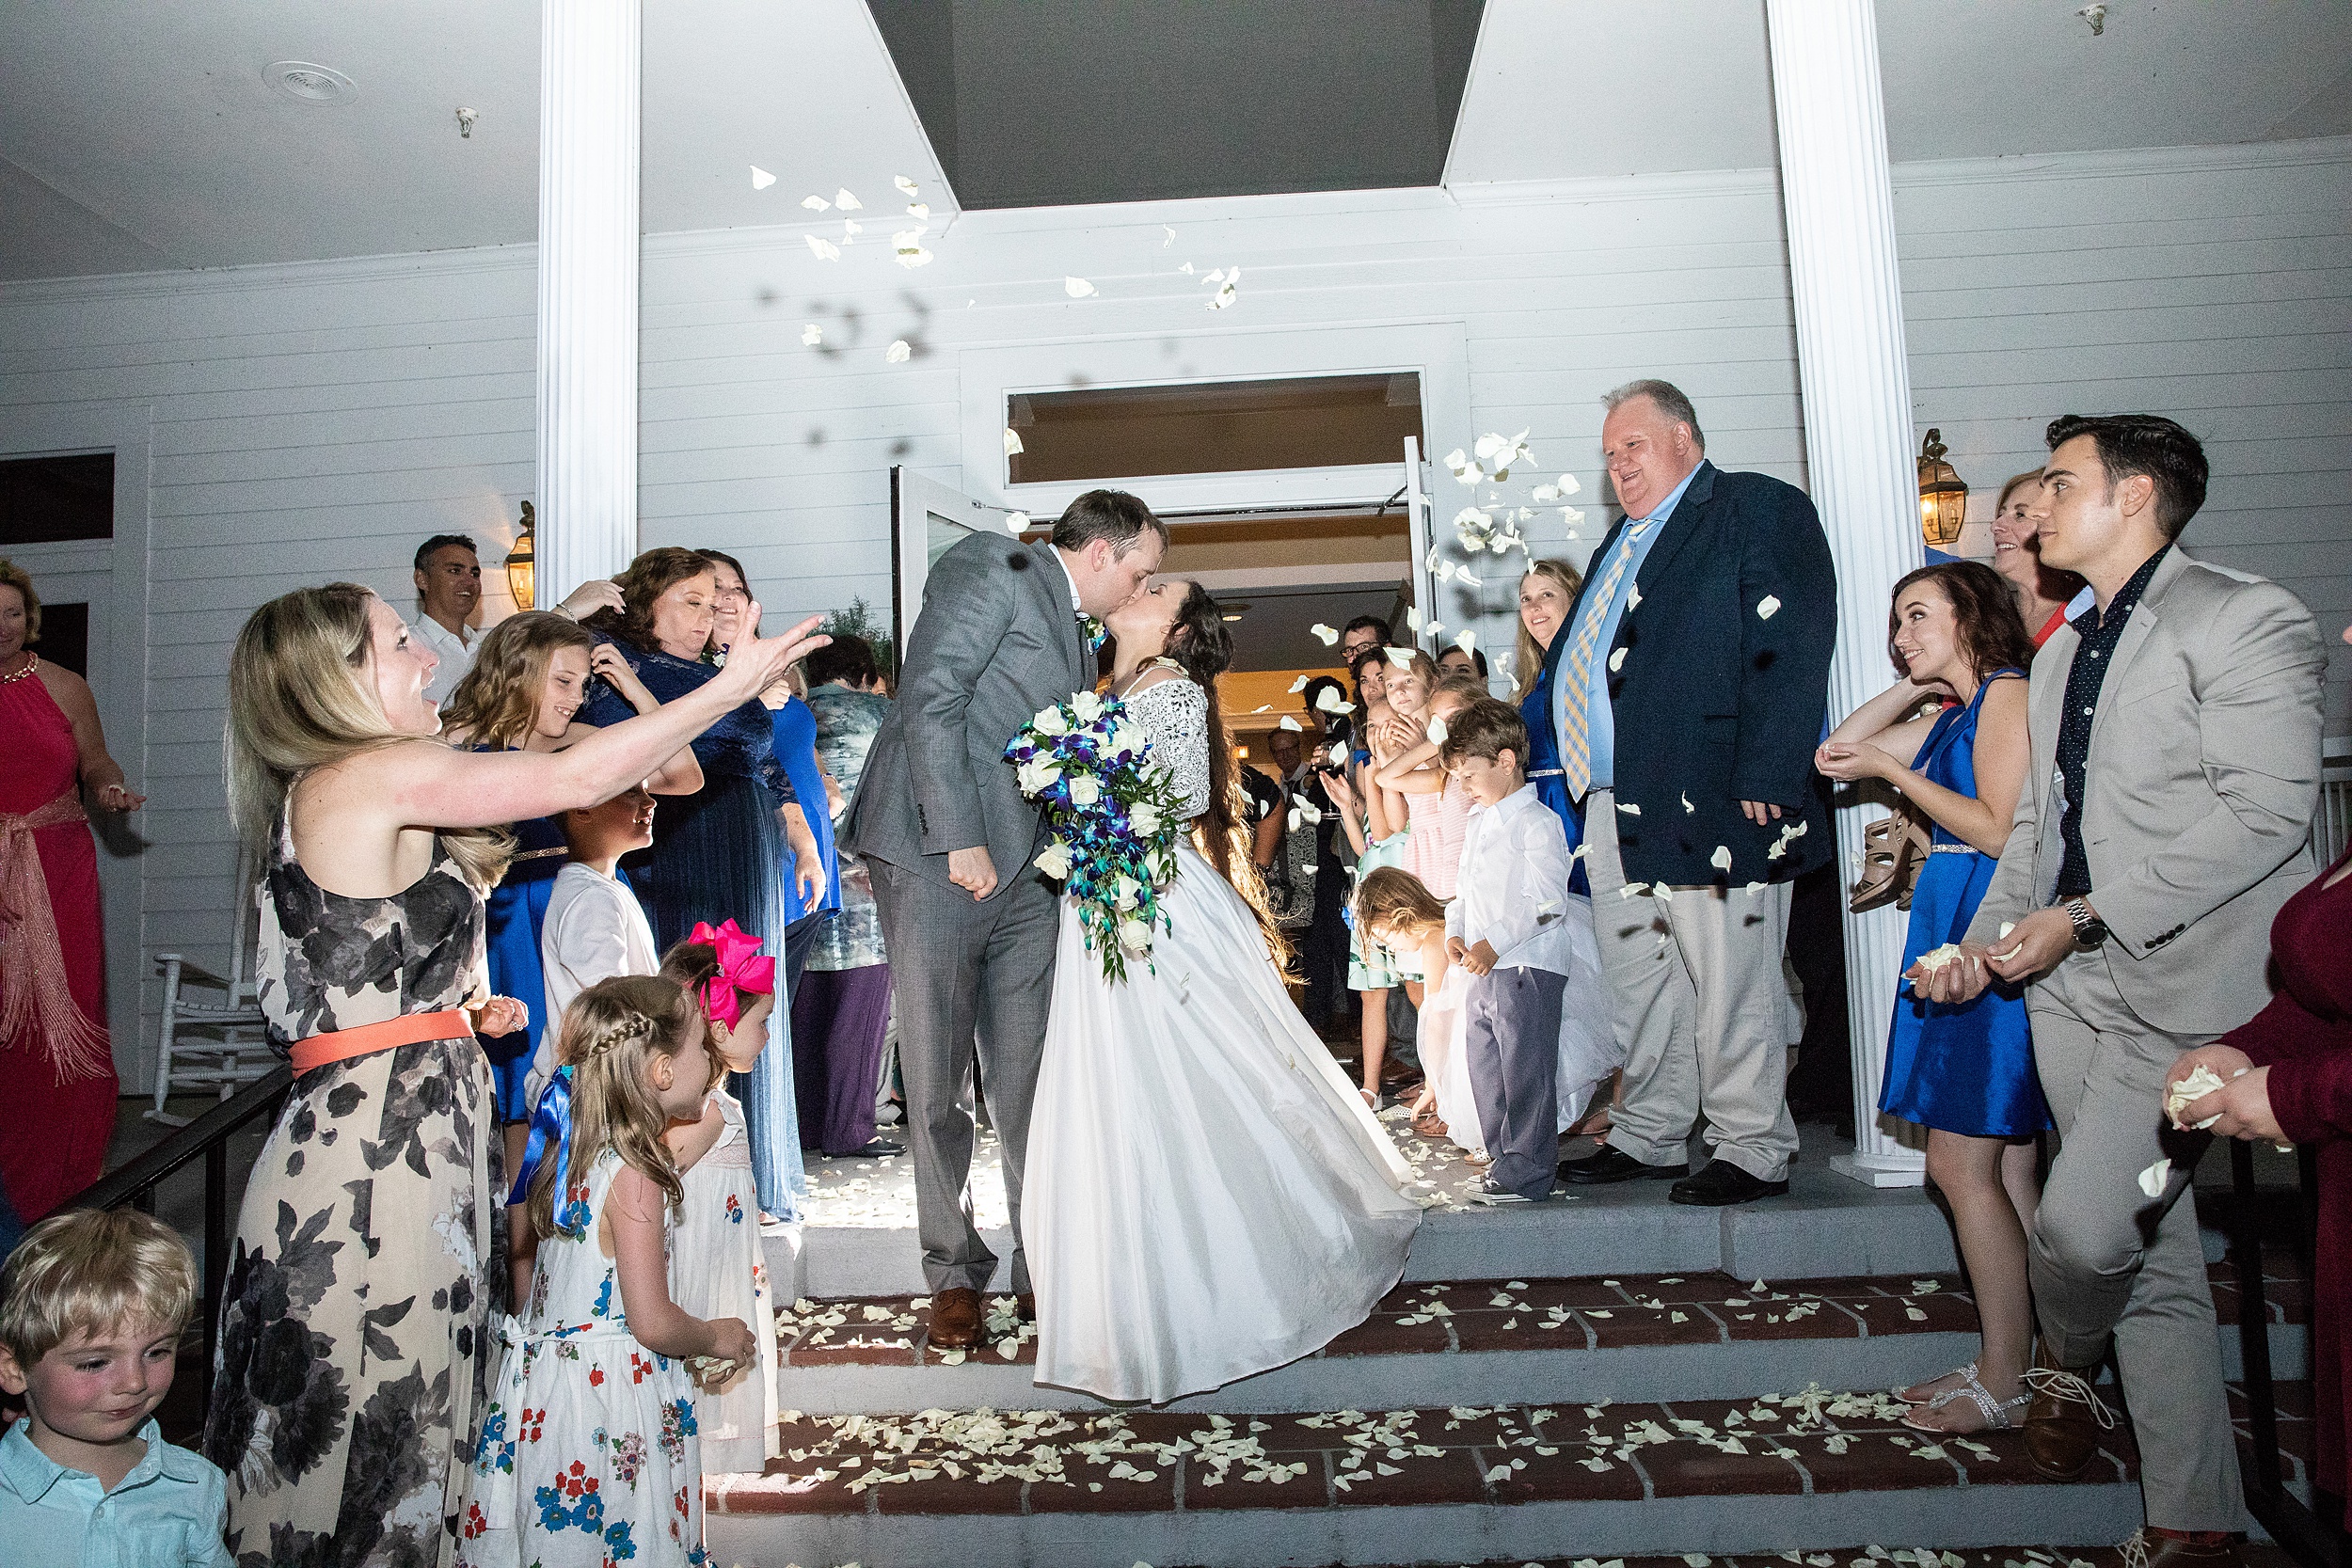 Newlyweds kiss at the steps of their wedding reception venue while leaving surrounded by guests throwing rose petals